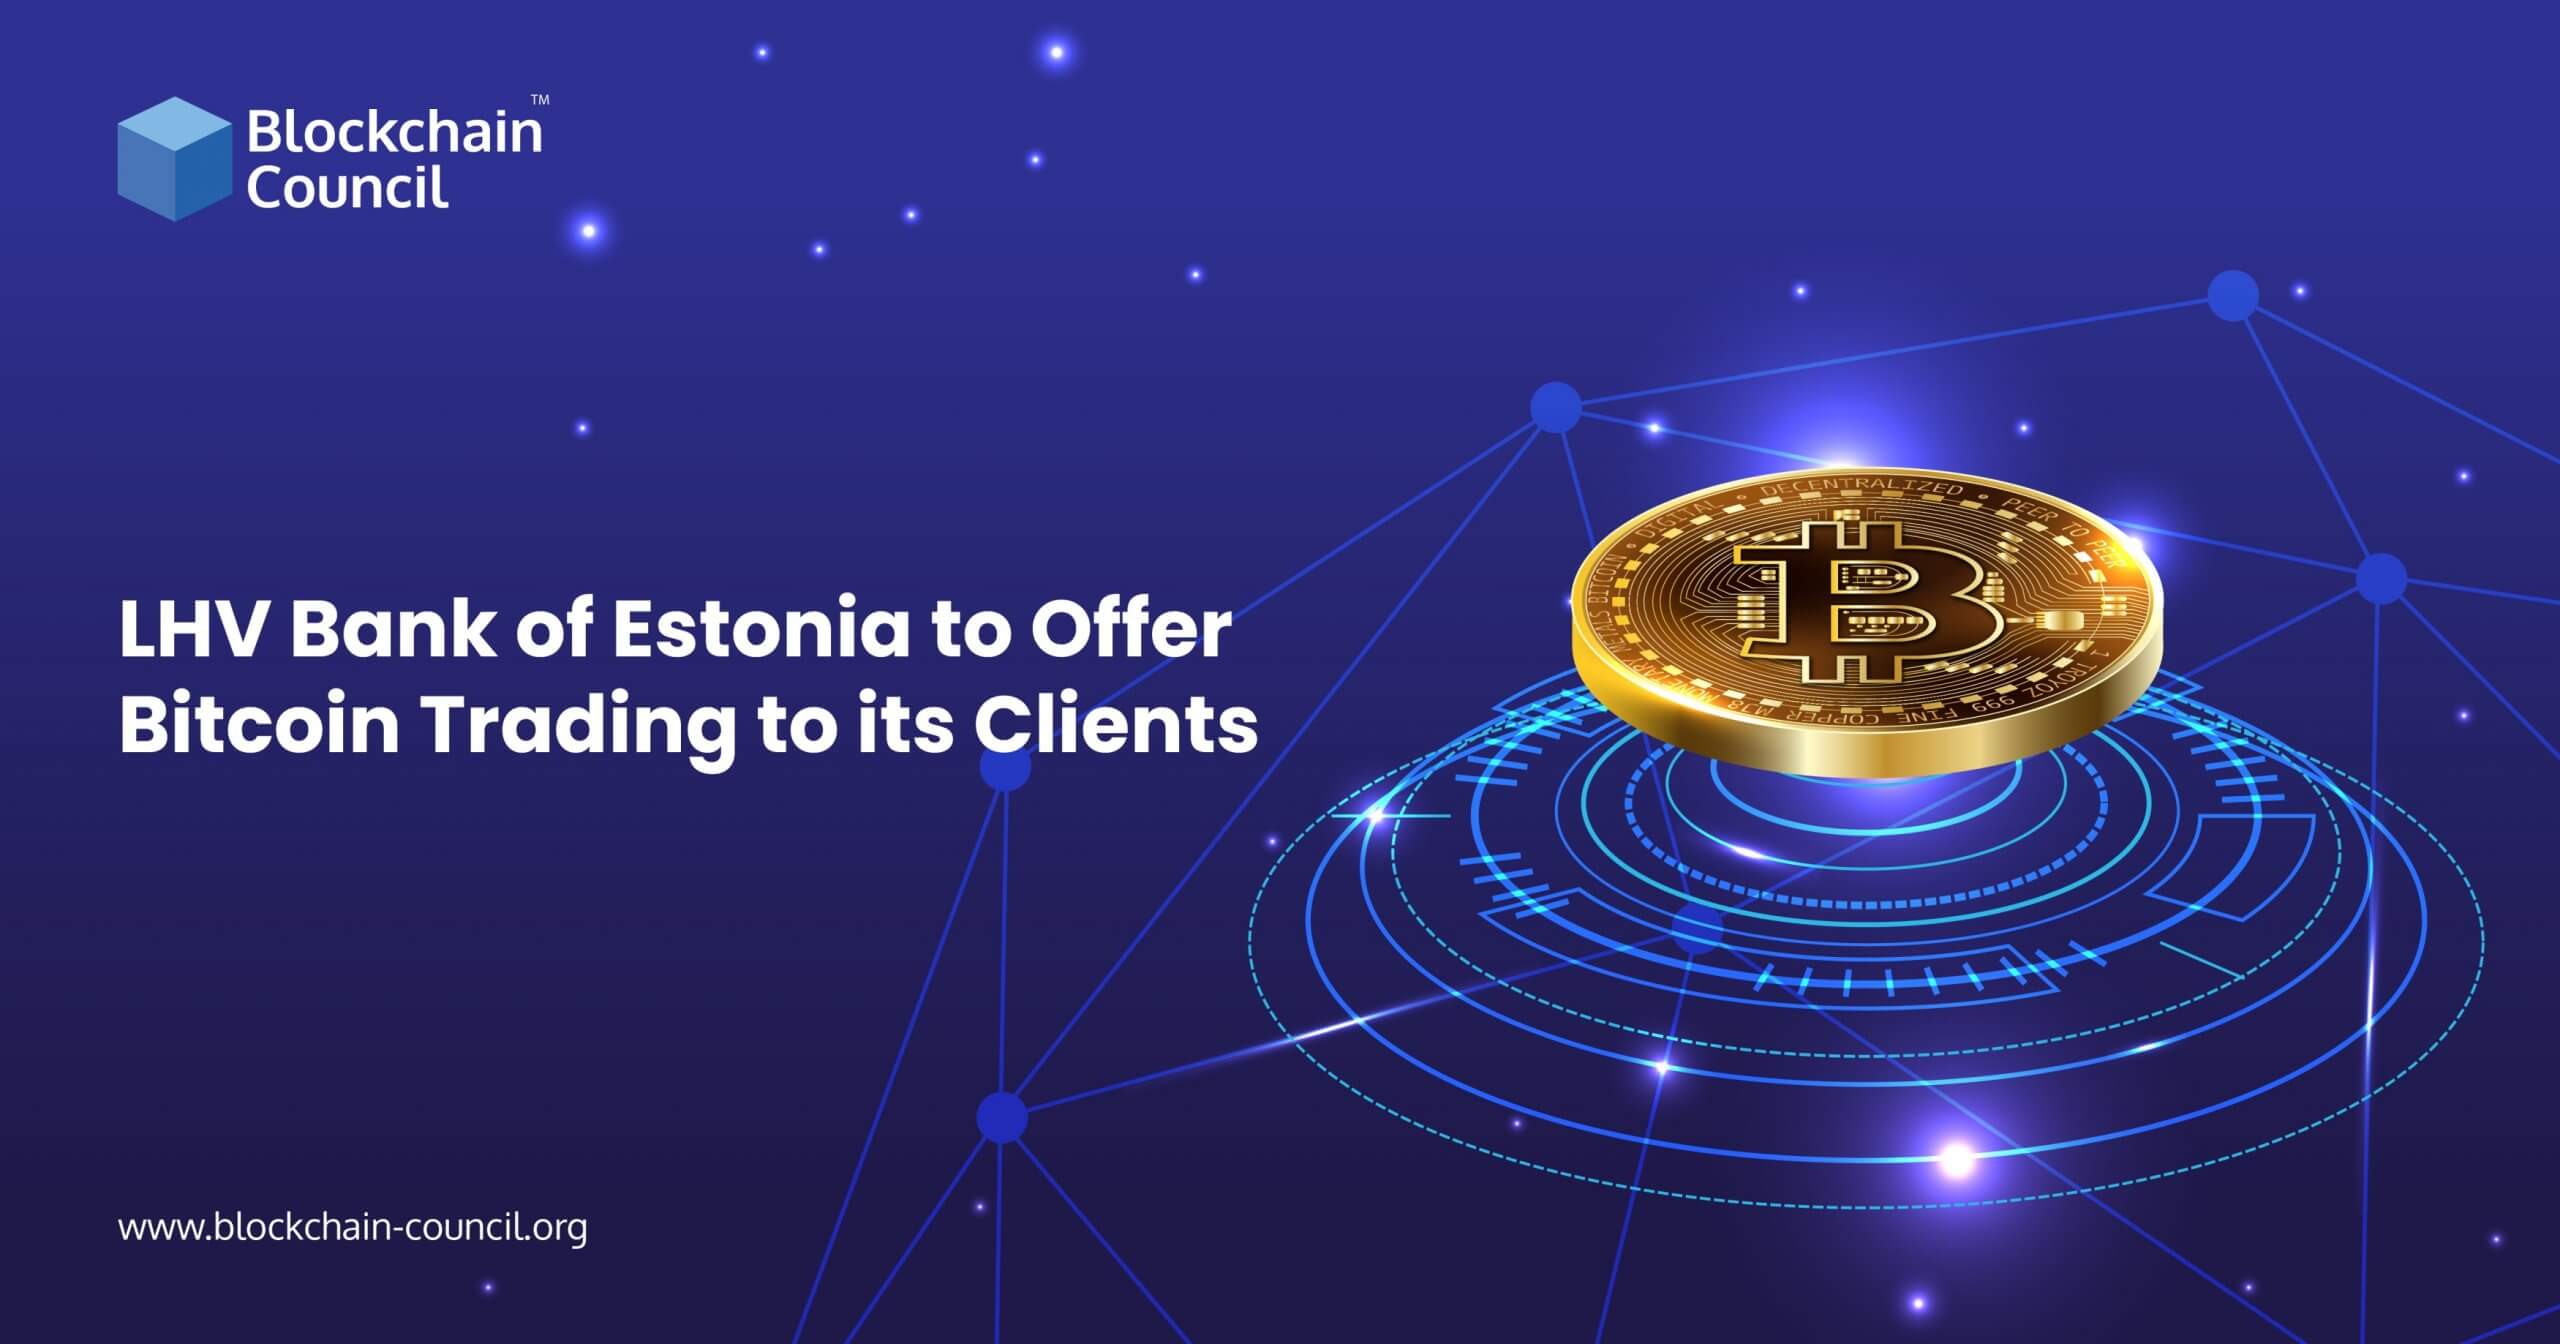 LHV Bank of Estonia to Offer Bitcoin Trading to its Clients